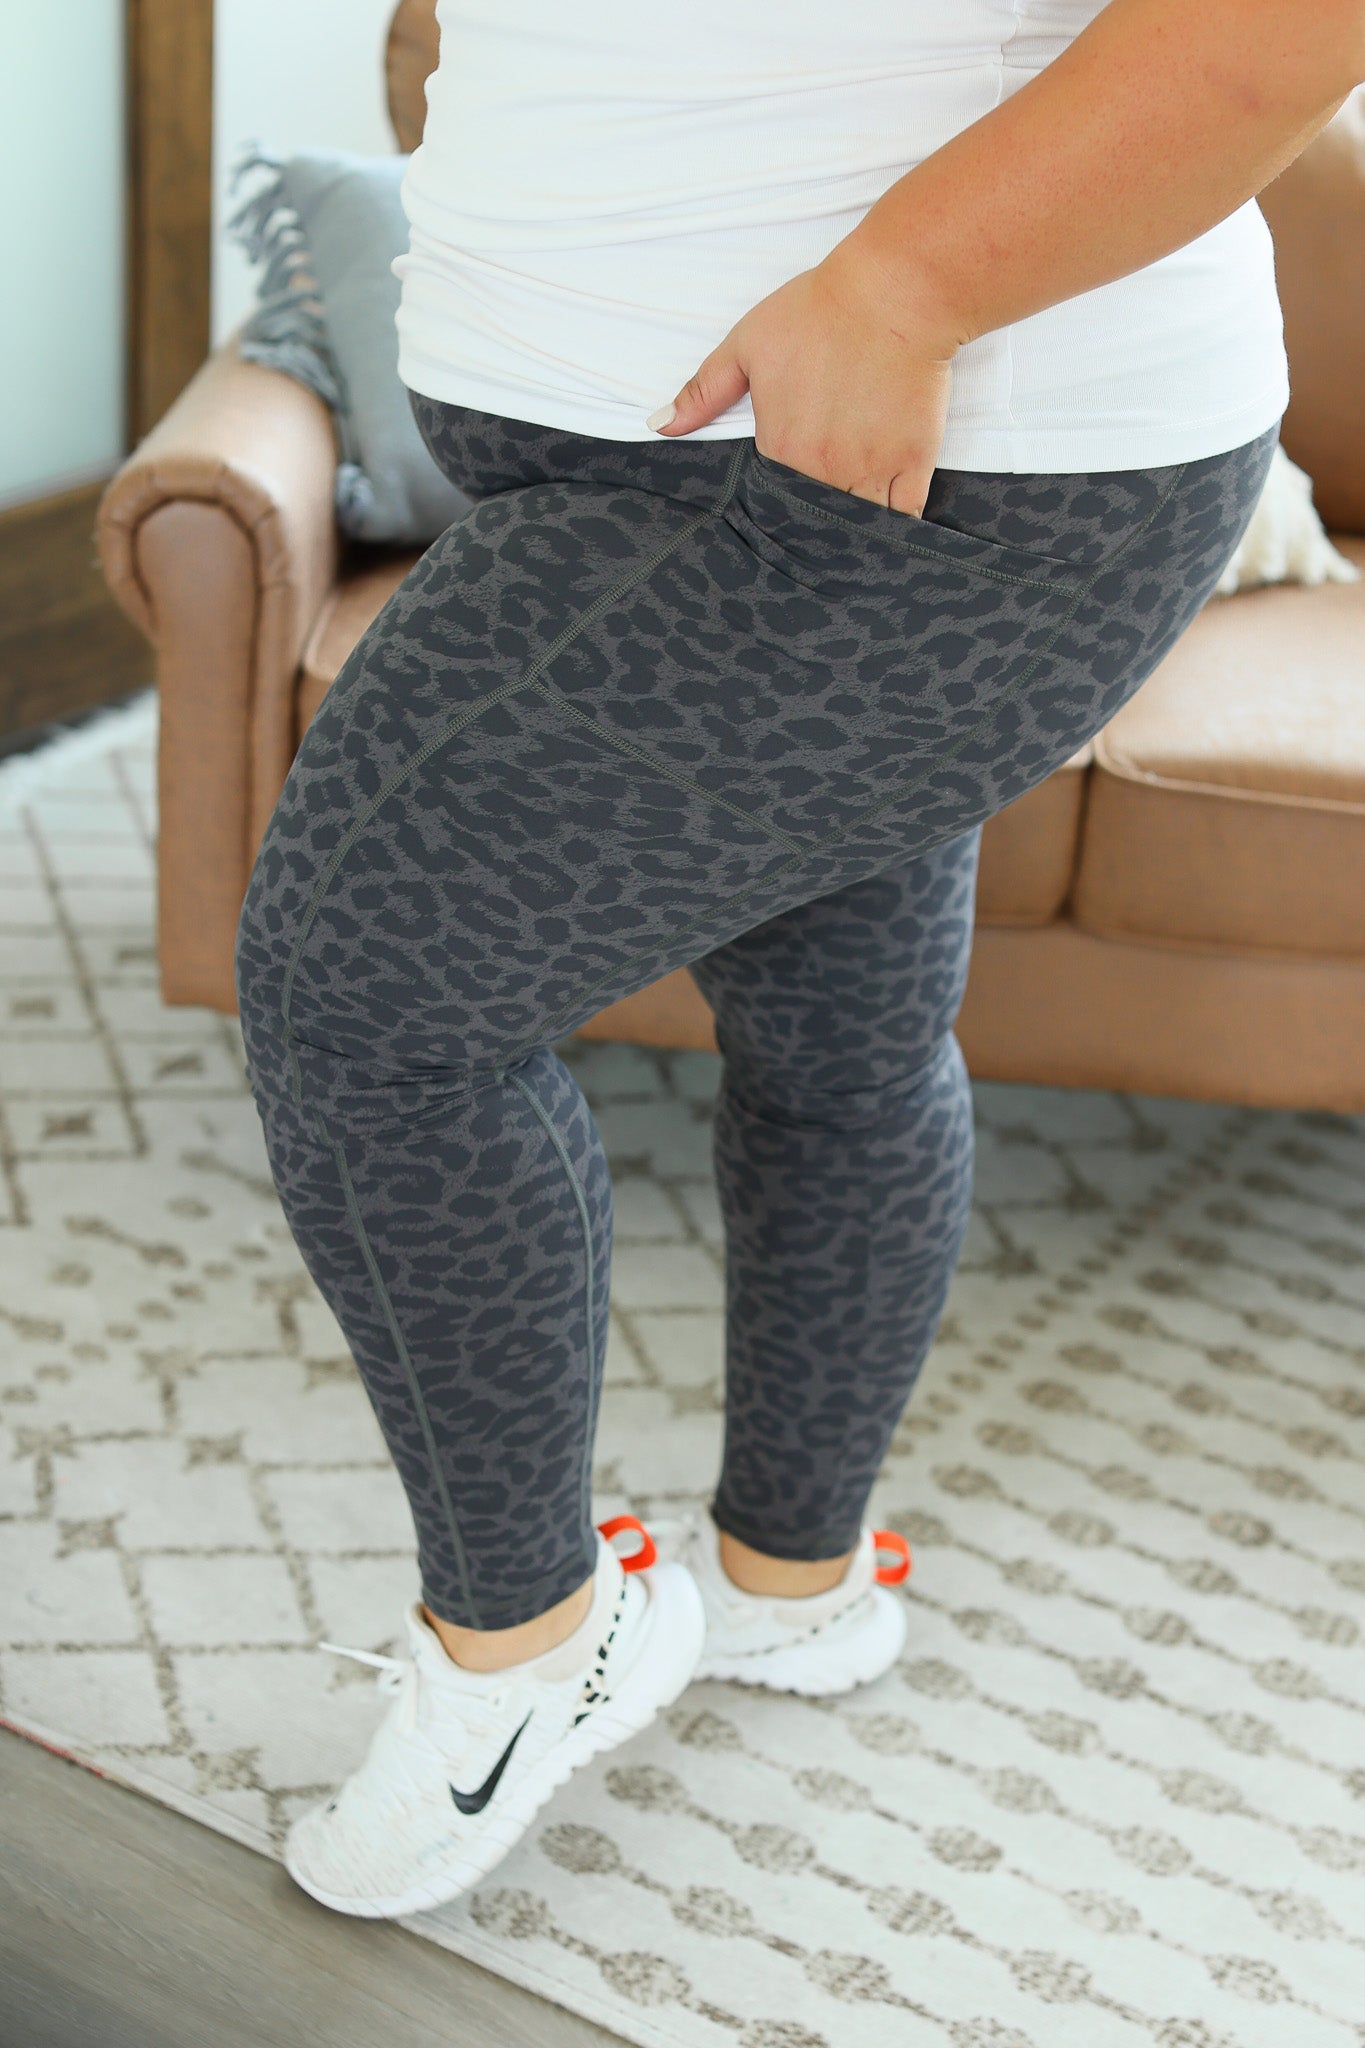 IN STOCK Athleisure Leggings - Charcoal Leopard